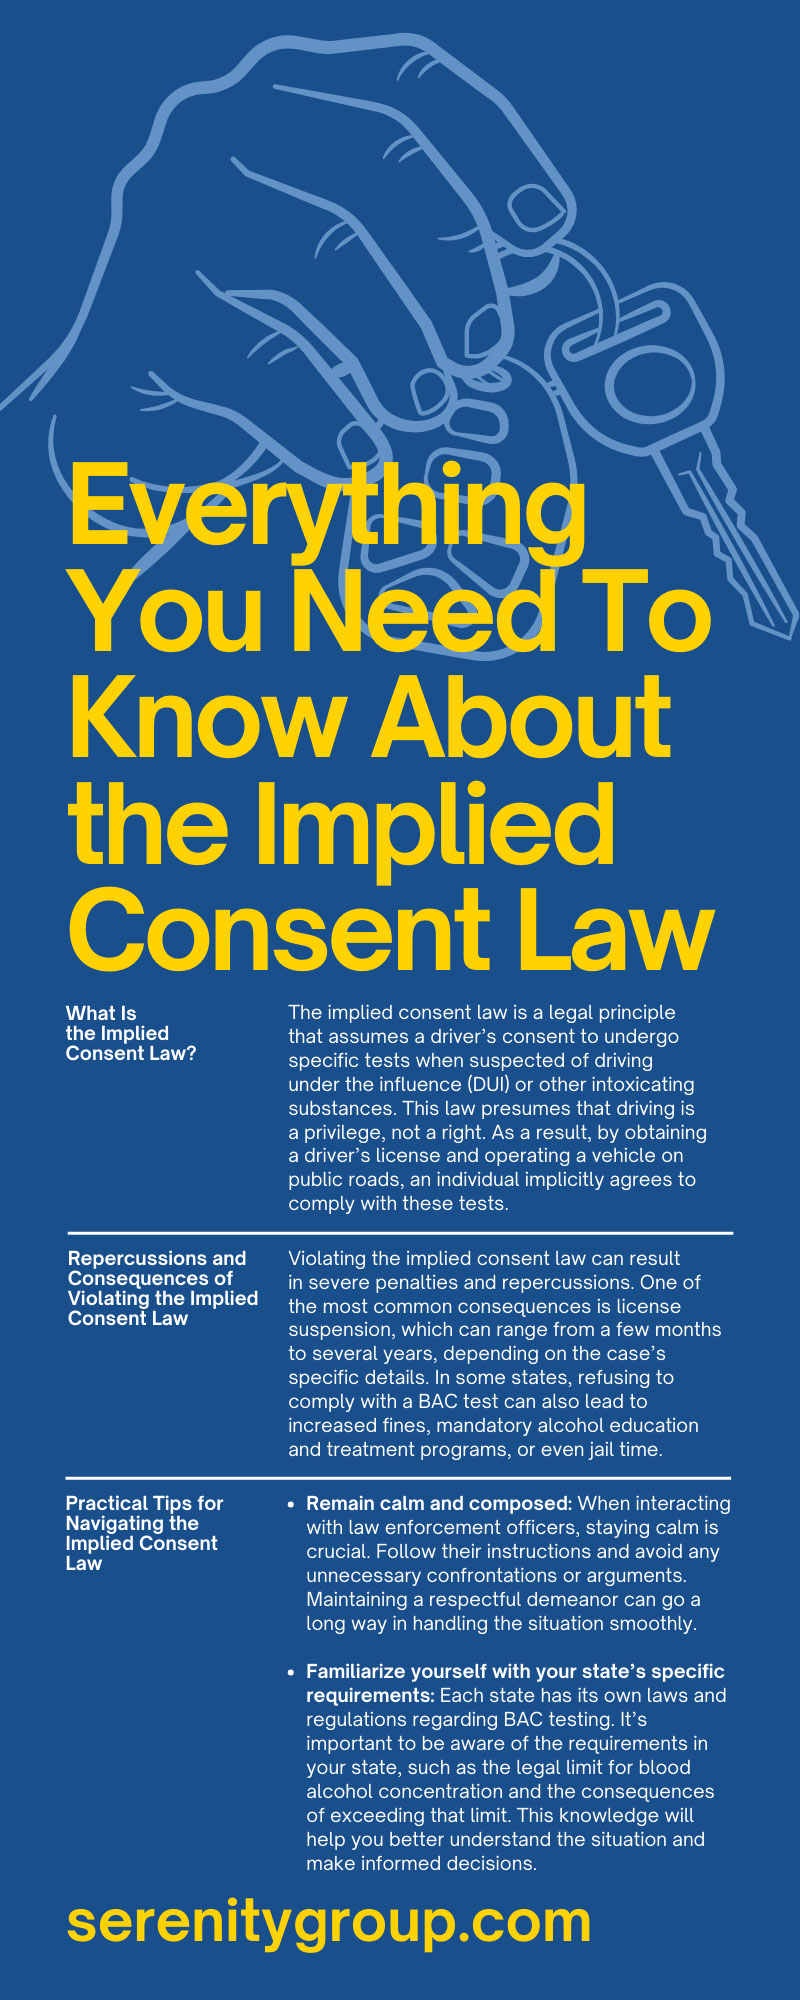 Everything You Need To Know About the Implied Consent Law
